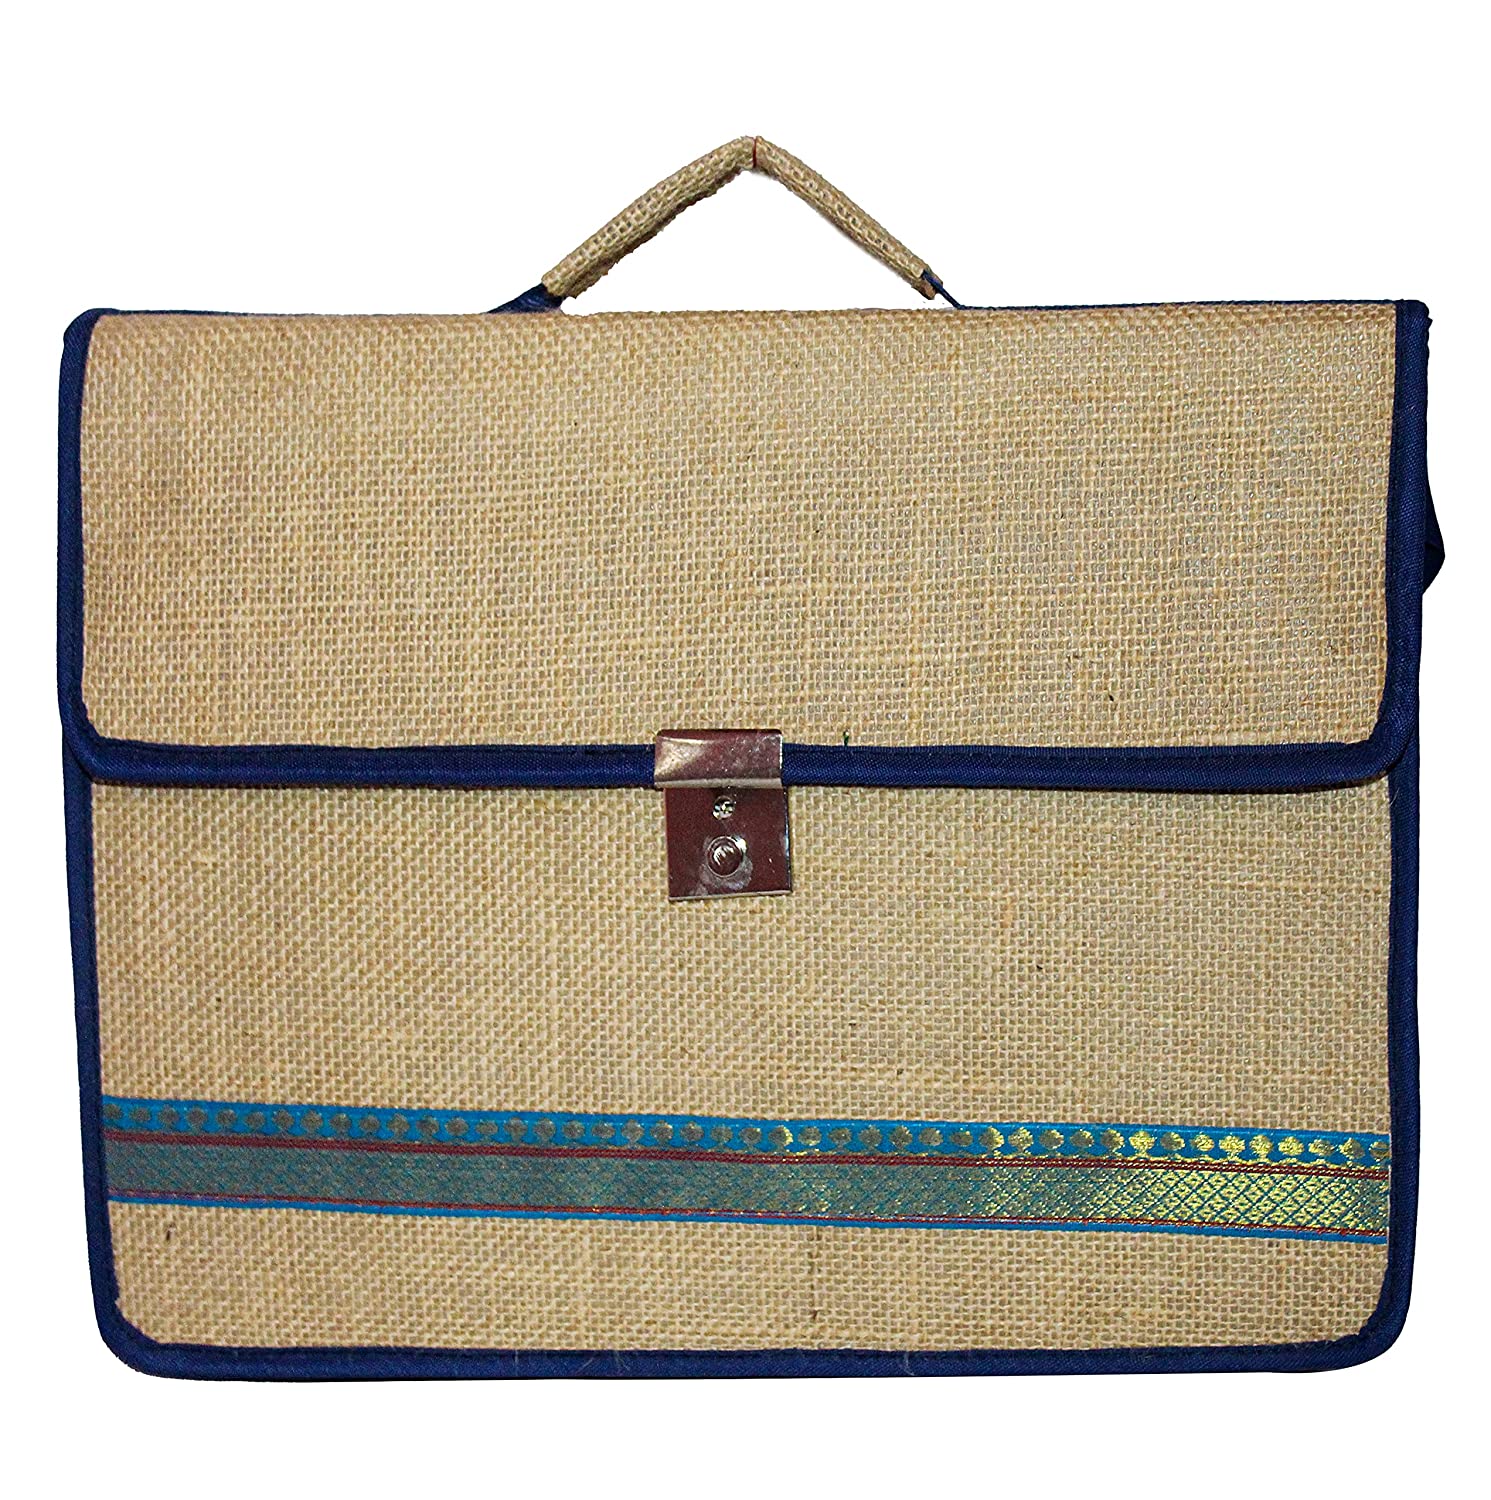 Jute Laptop Bag For Official Use With 15.6 Inch screen for Professional Work & Travel